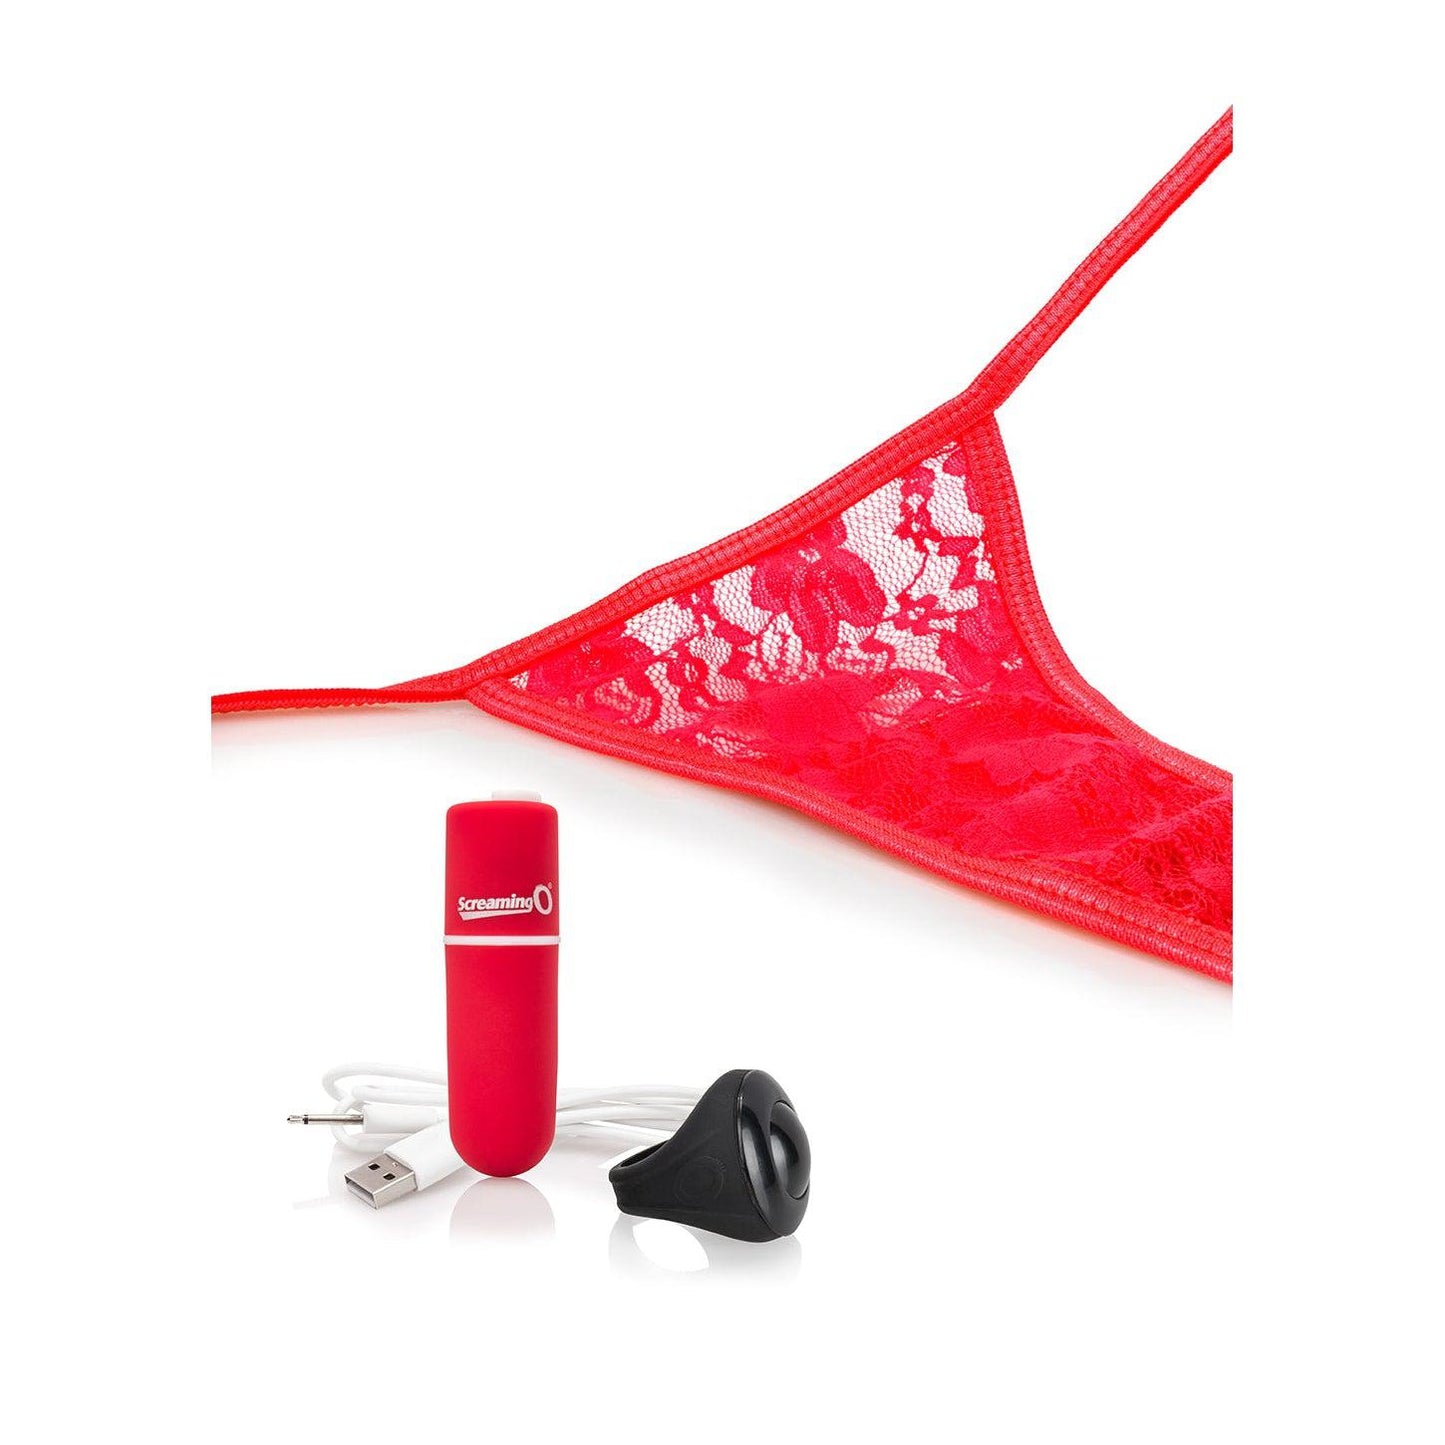 My Secret Charged Remote Control Panty Vibe - Red